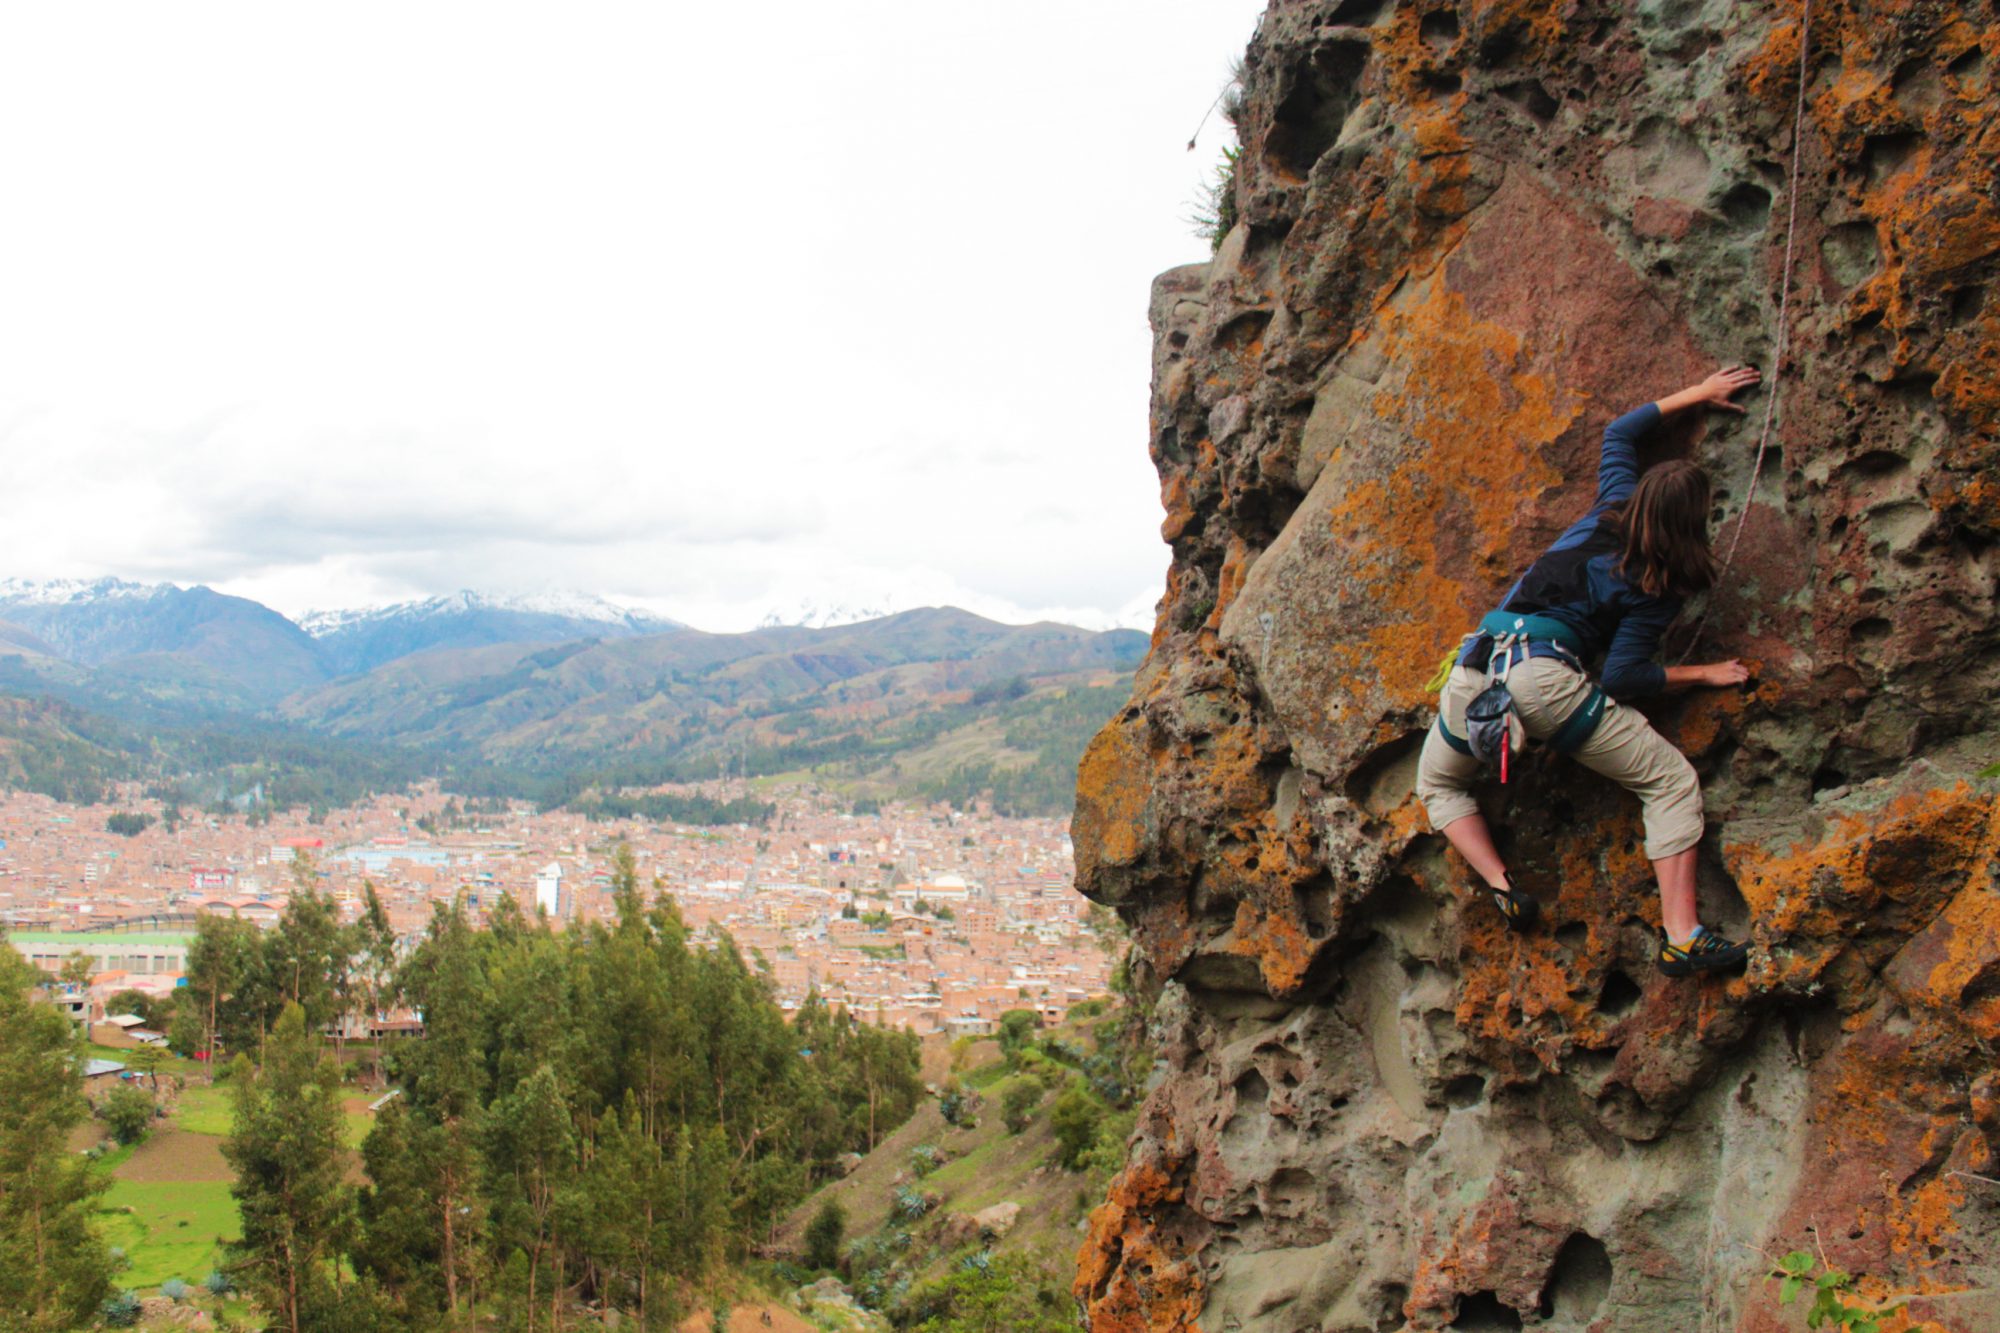 Belaying from a Backpack — The Difficult Alternative to Van Life